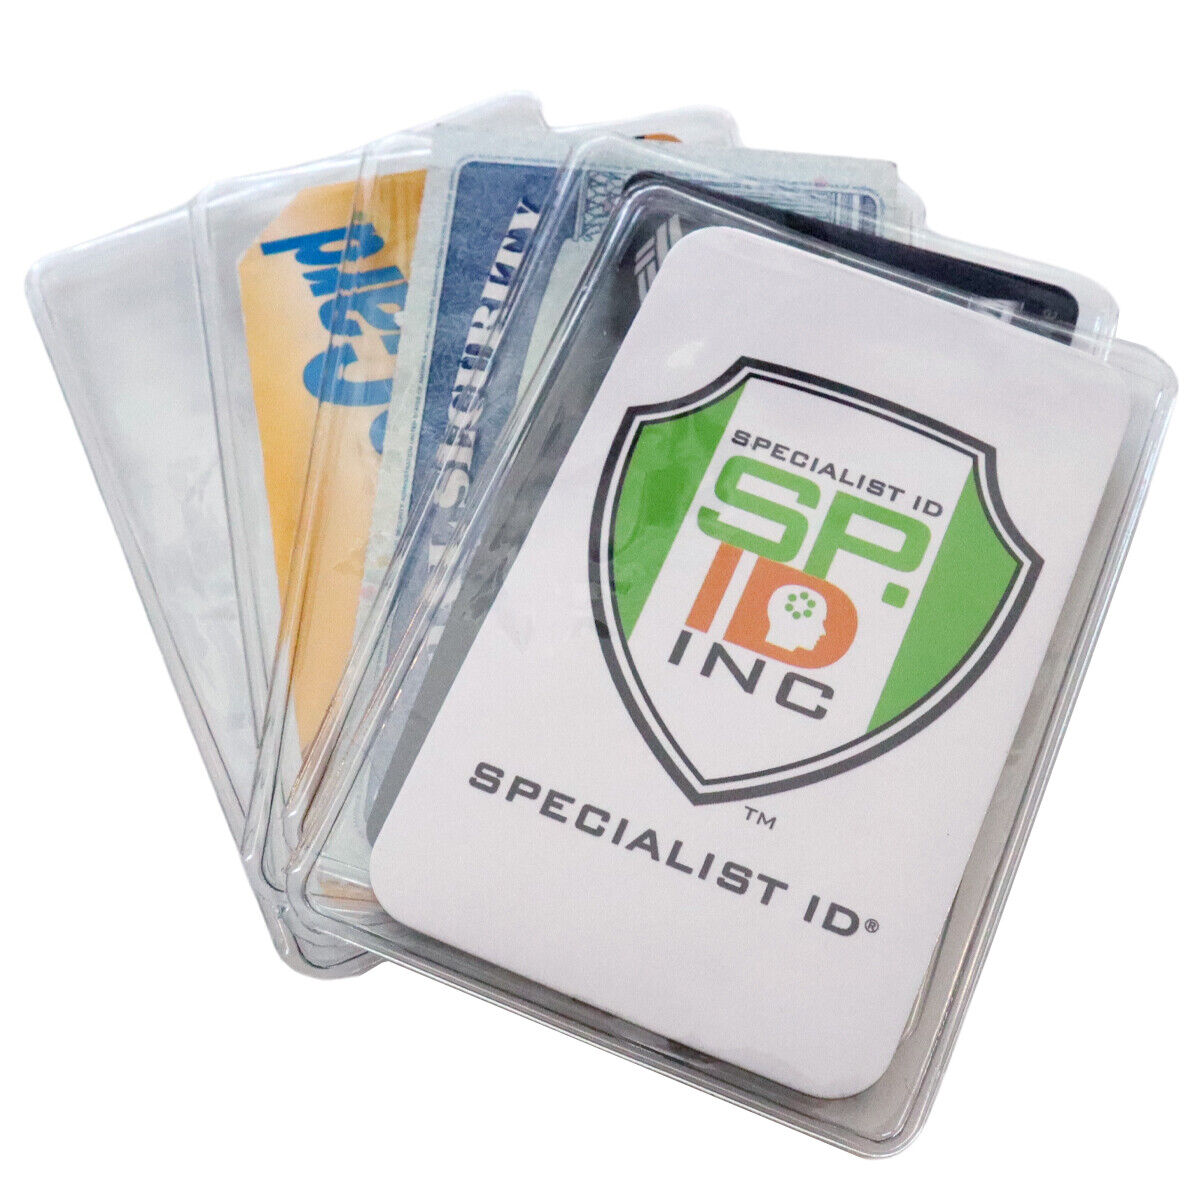 5 Pack - Medicare Card Holder Protector Sleeves - Clear Vinyl Credit Card Covers Specialist ID - фотография #8